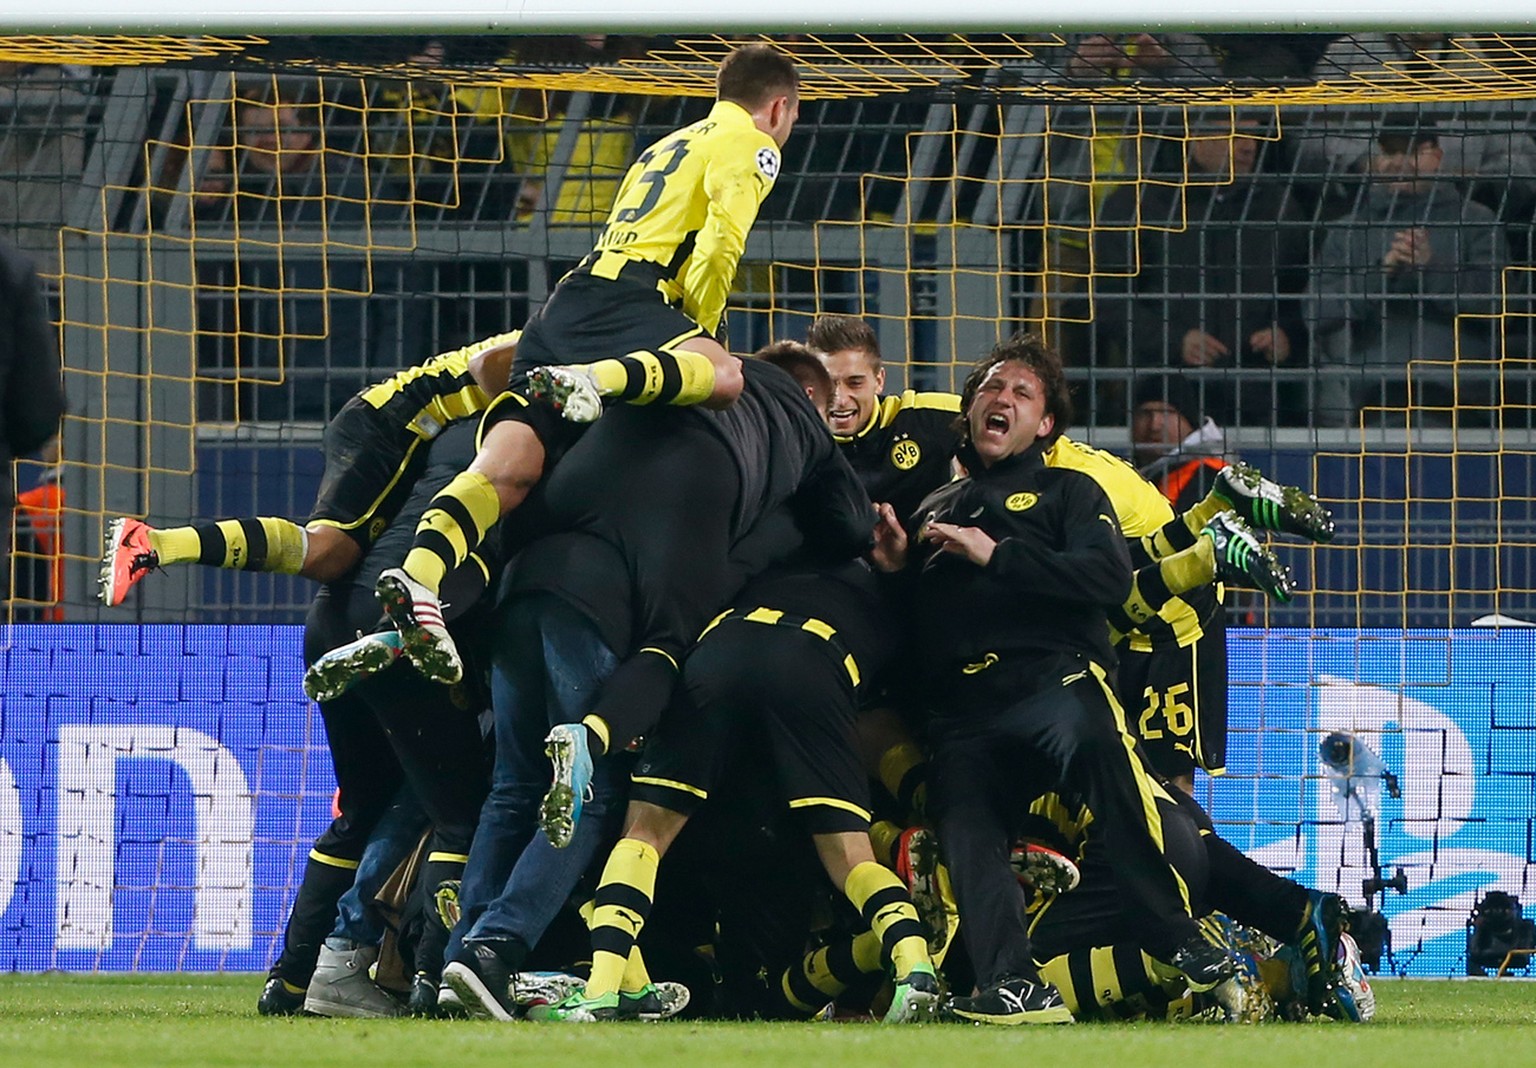 Dortmund players celebrate at the end of the Champions League quarterfinal second leg soccer match between Borussia Dortmund and Malaga CF in Dortmund, Germany, Tuesday, April 9, 2013. Dortmund defeat ...